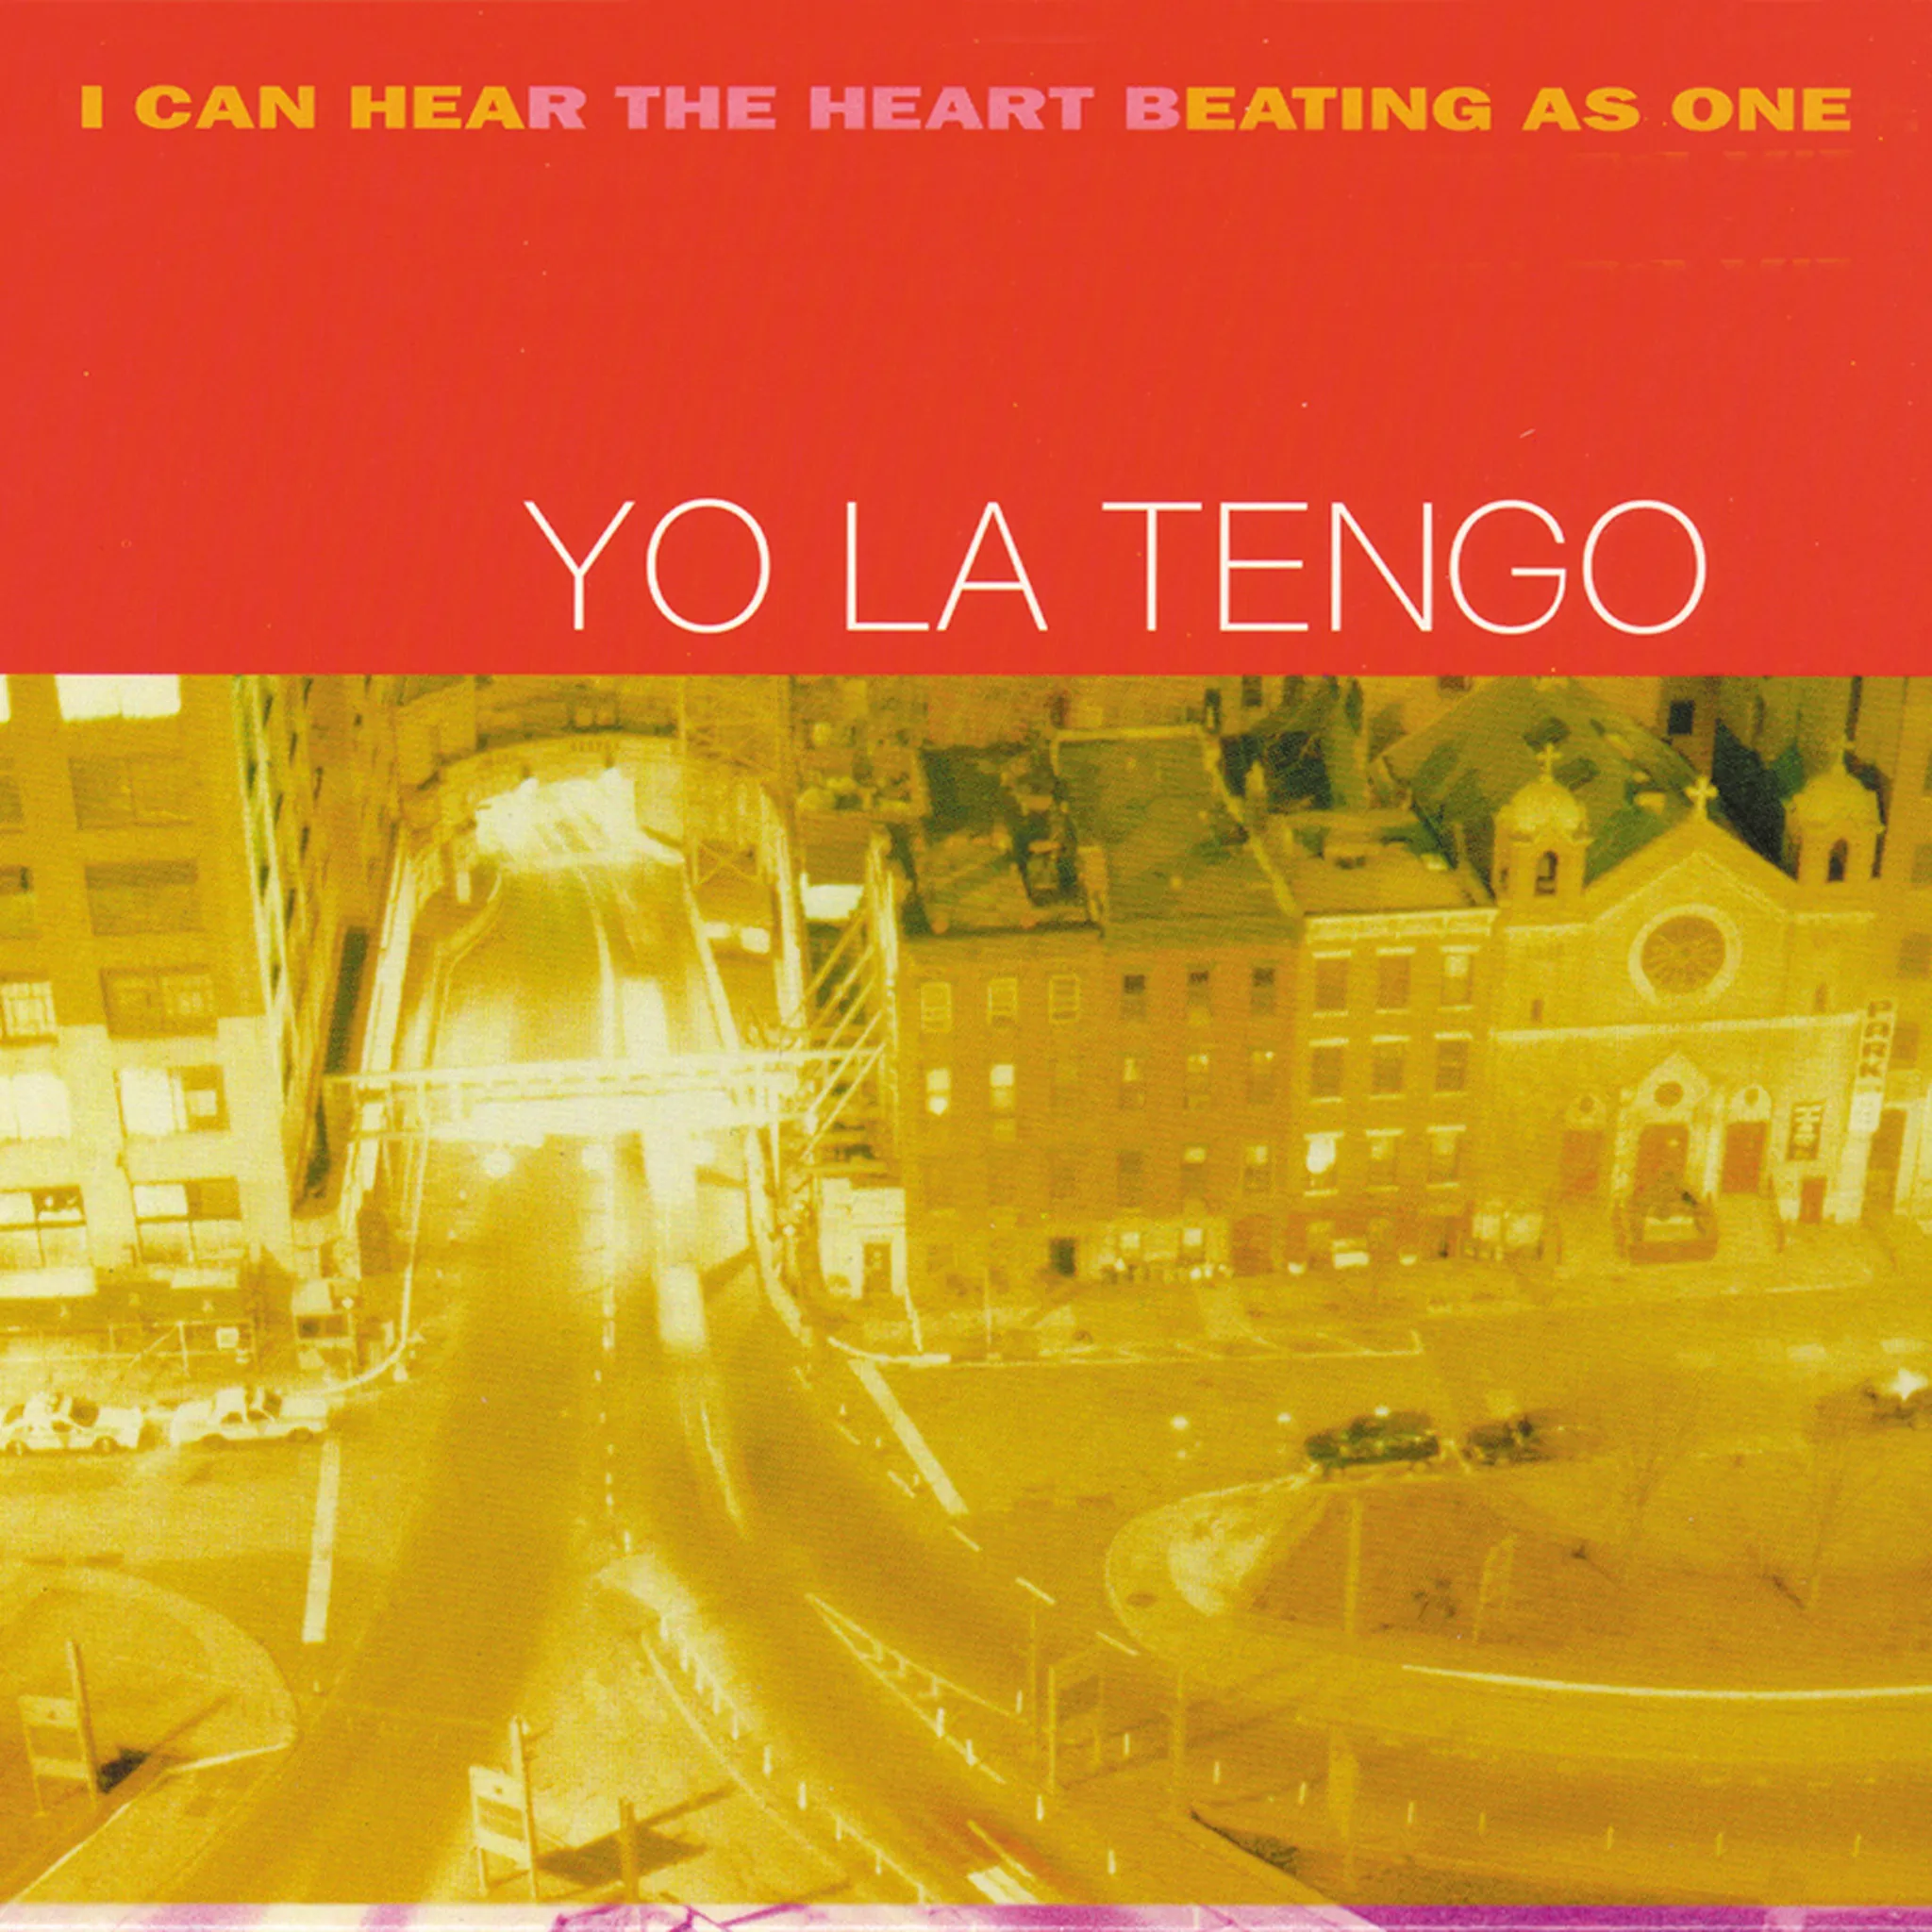 <strong>Yo La Tengo - I Can Hear The Heart Beating As One</strong> (Vinyl LP - black)